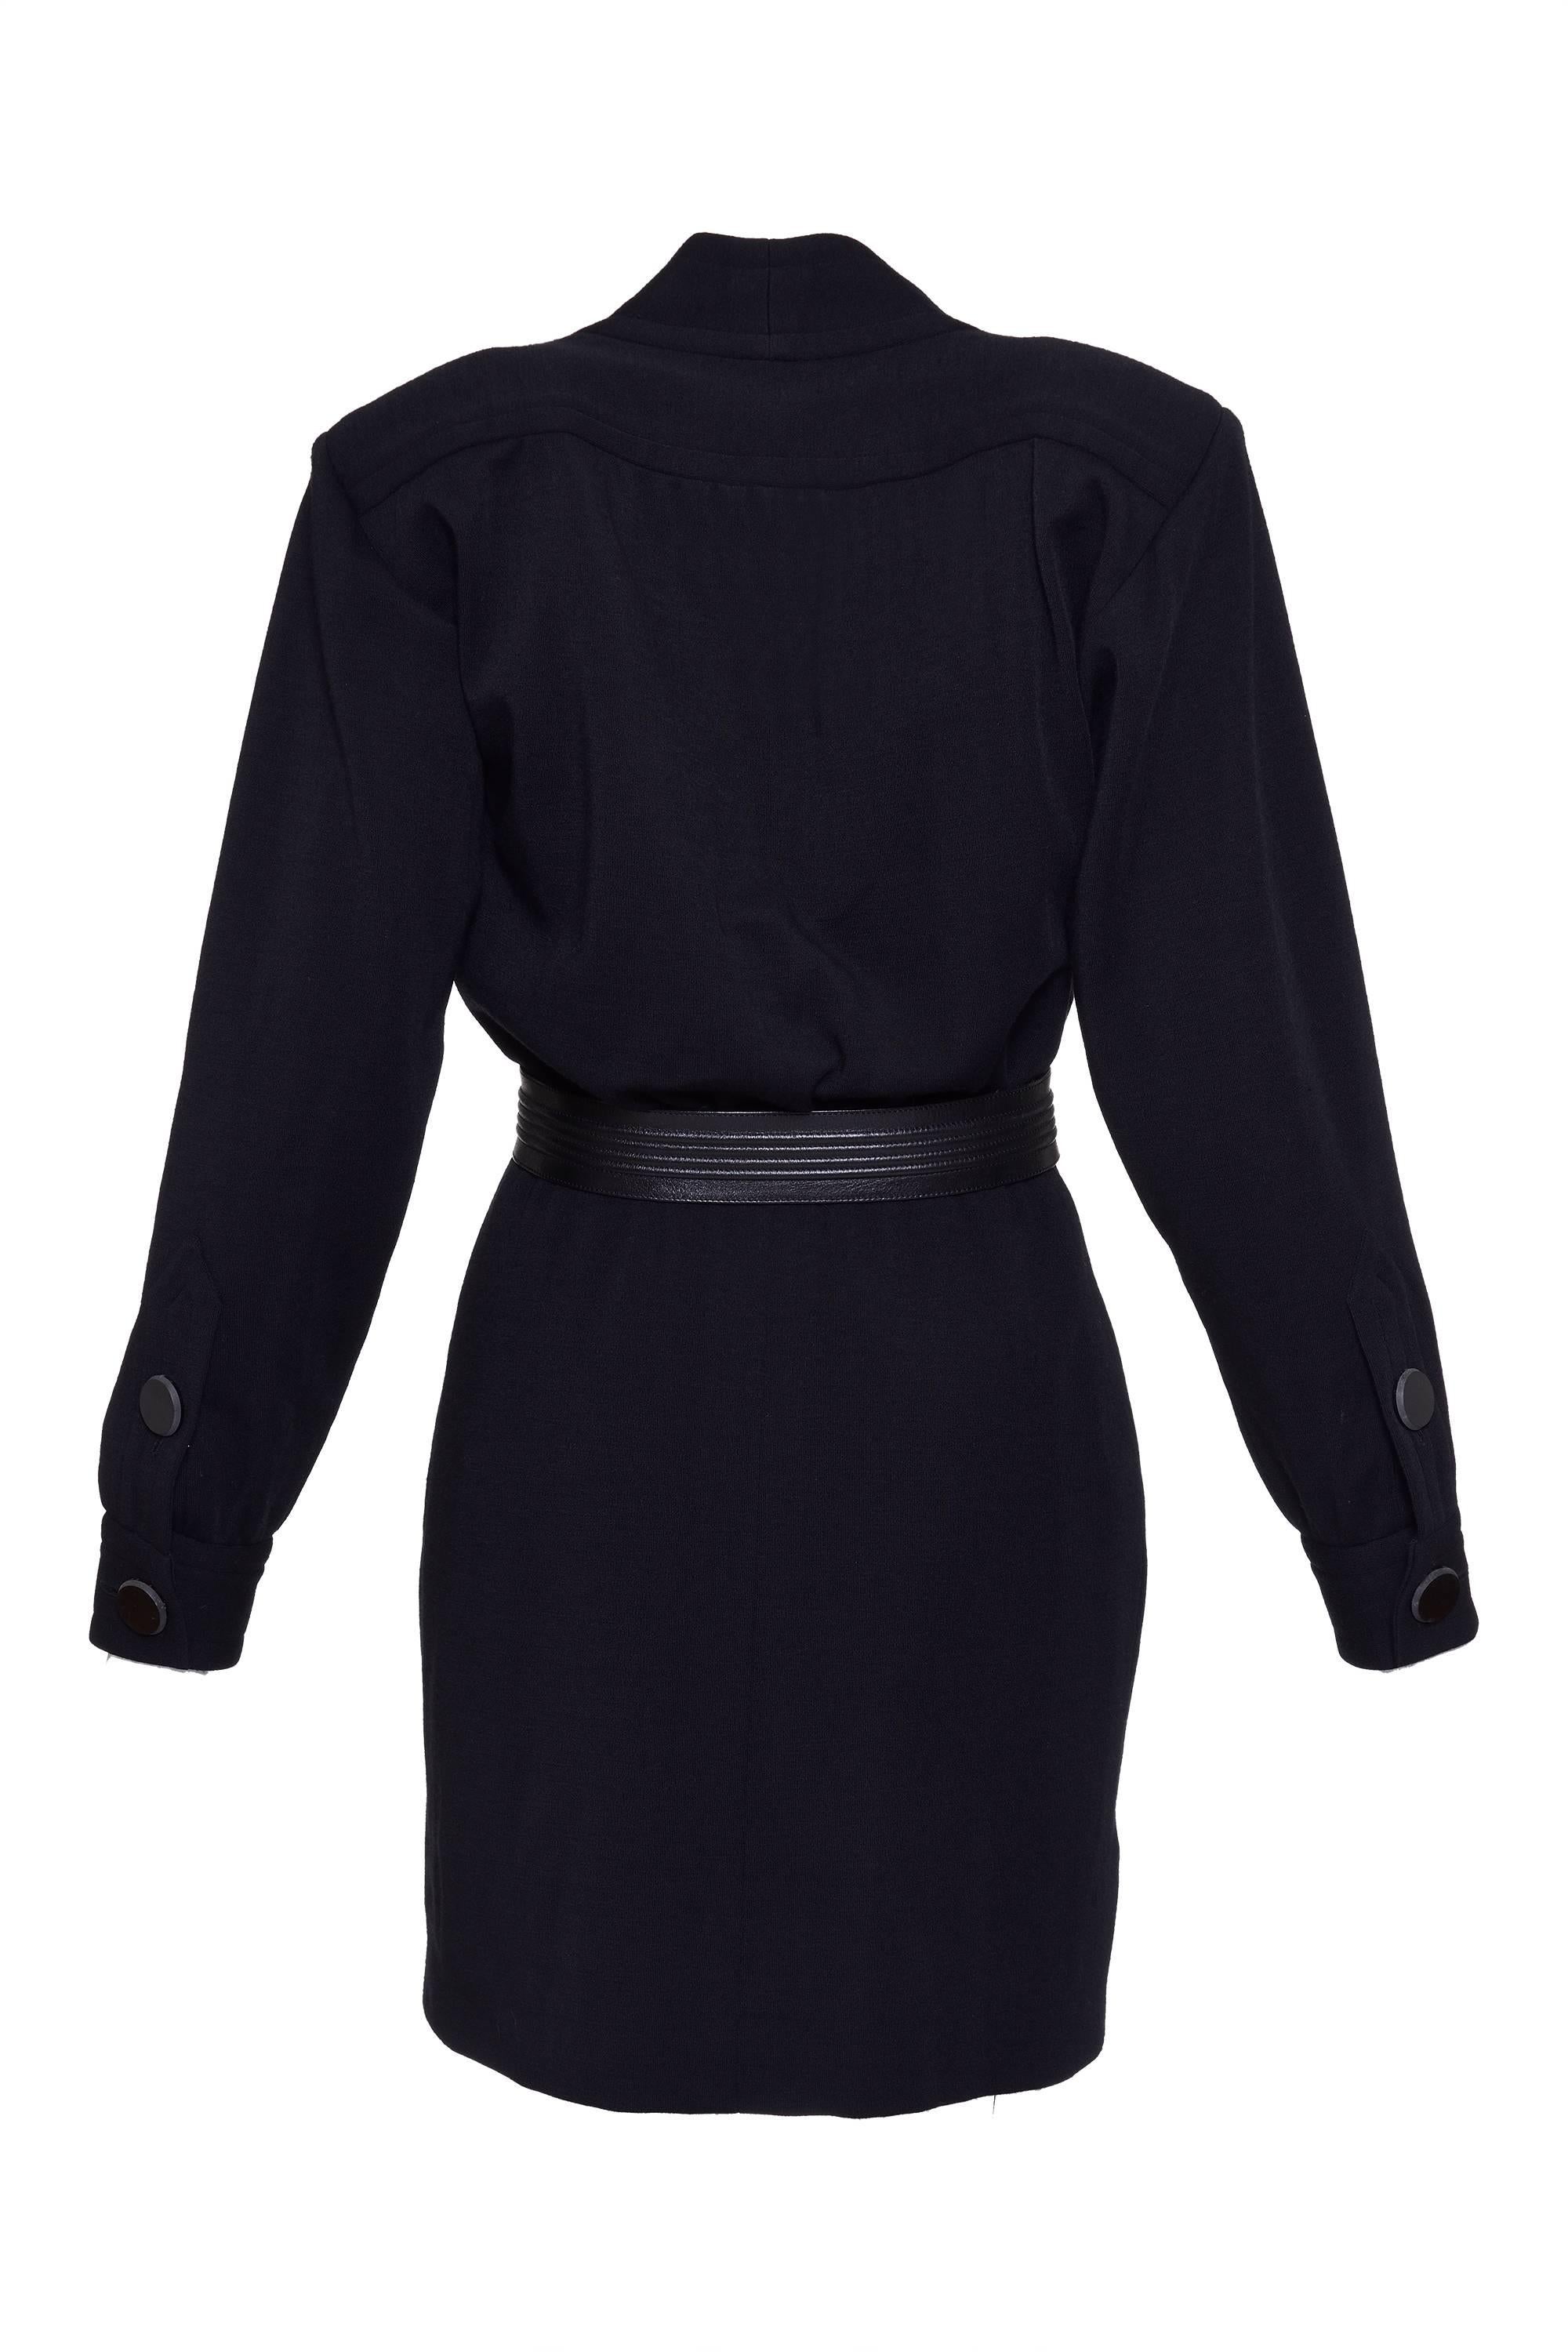 1980s YVES SAINT LAURENT Rive Gauche Black Suit Dress In Excellent Condition In Milan, Italy